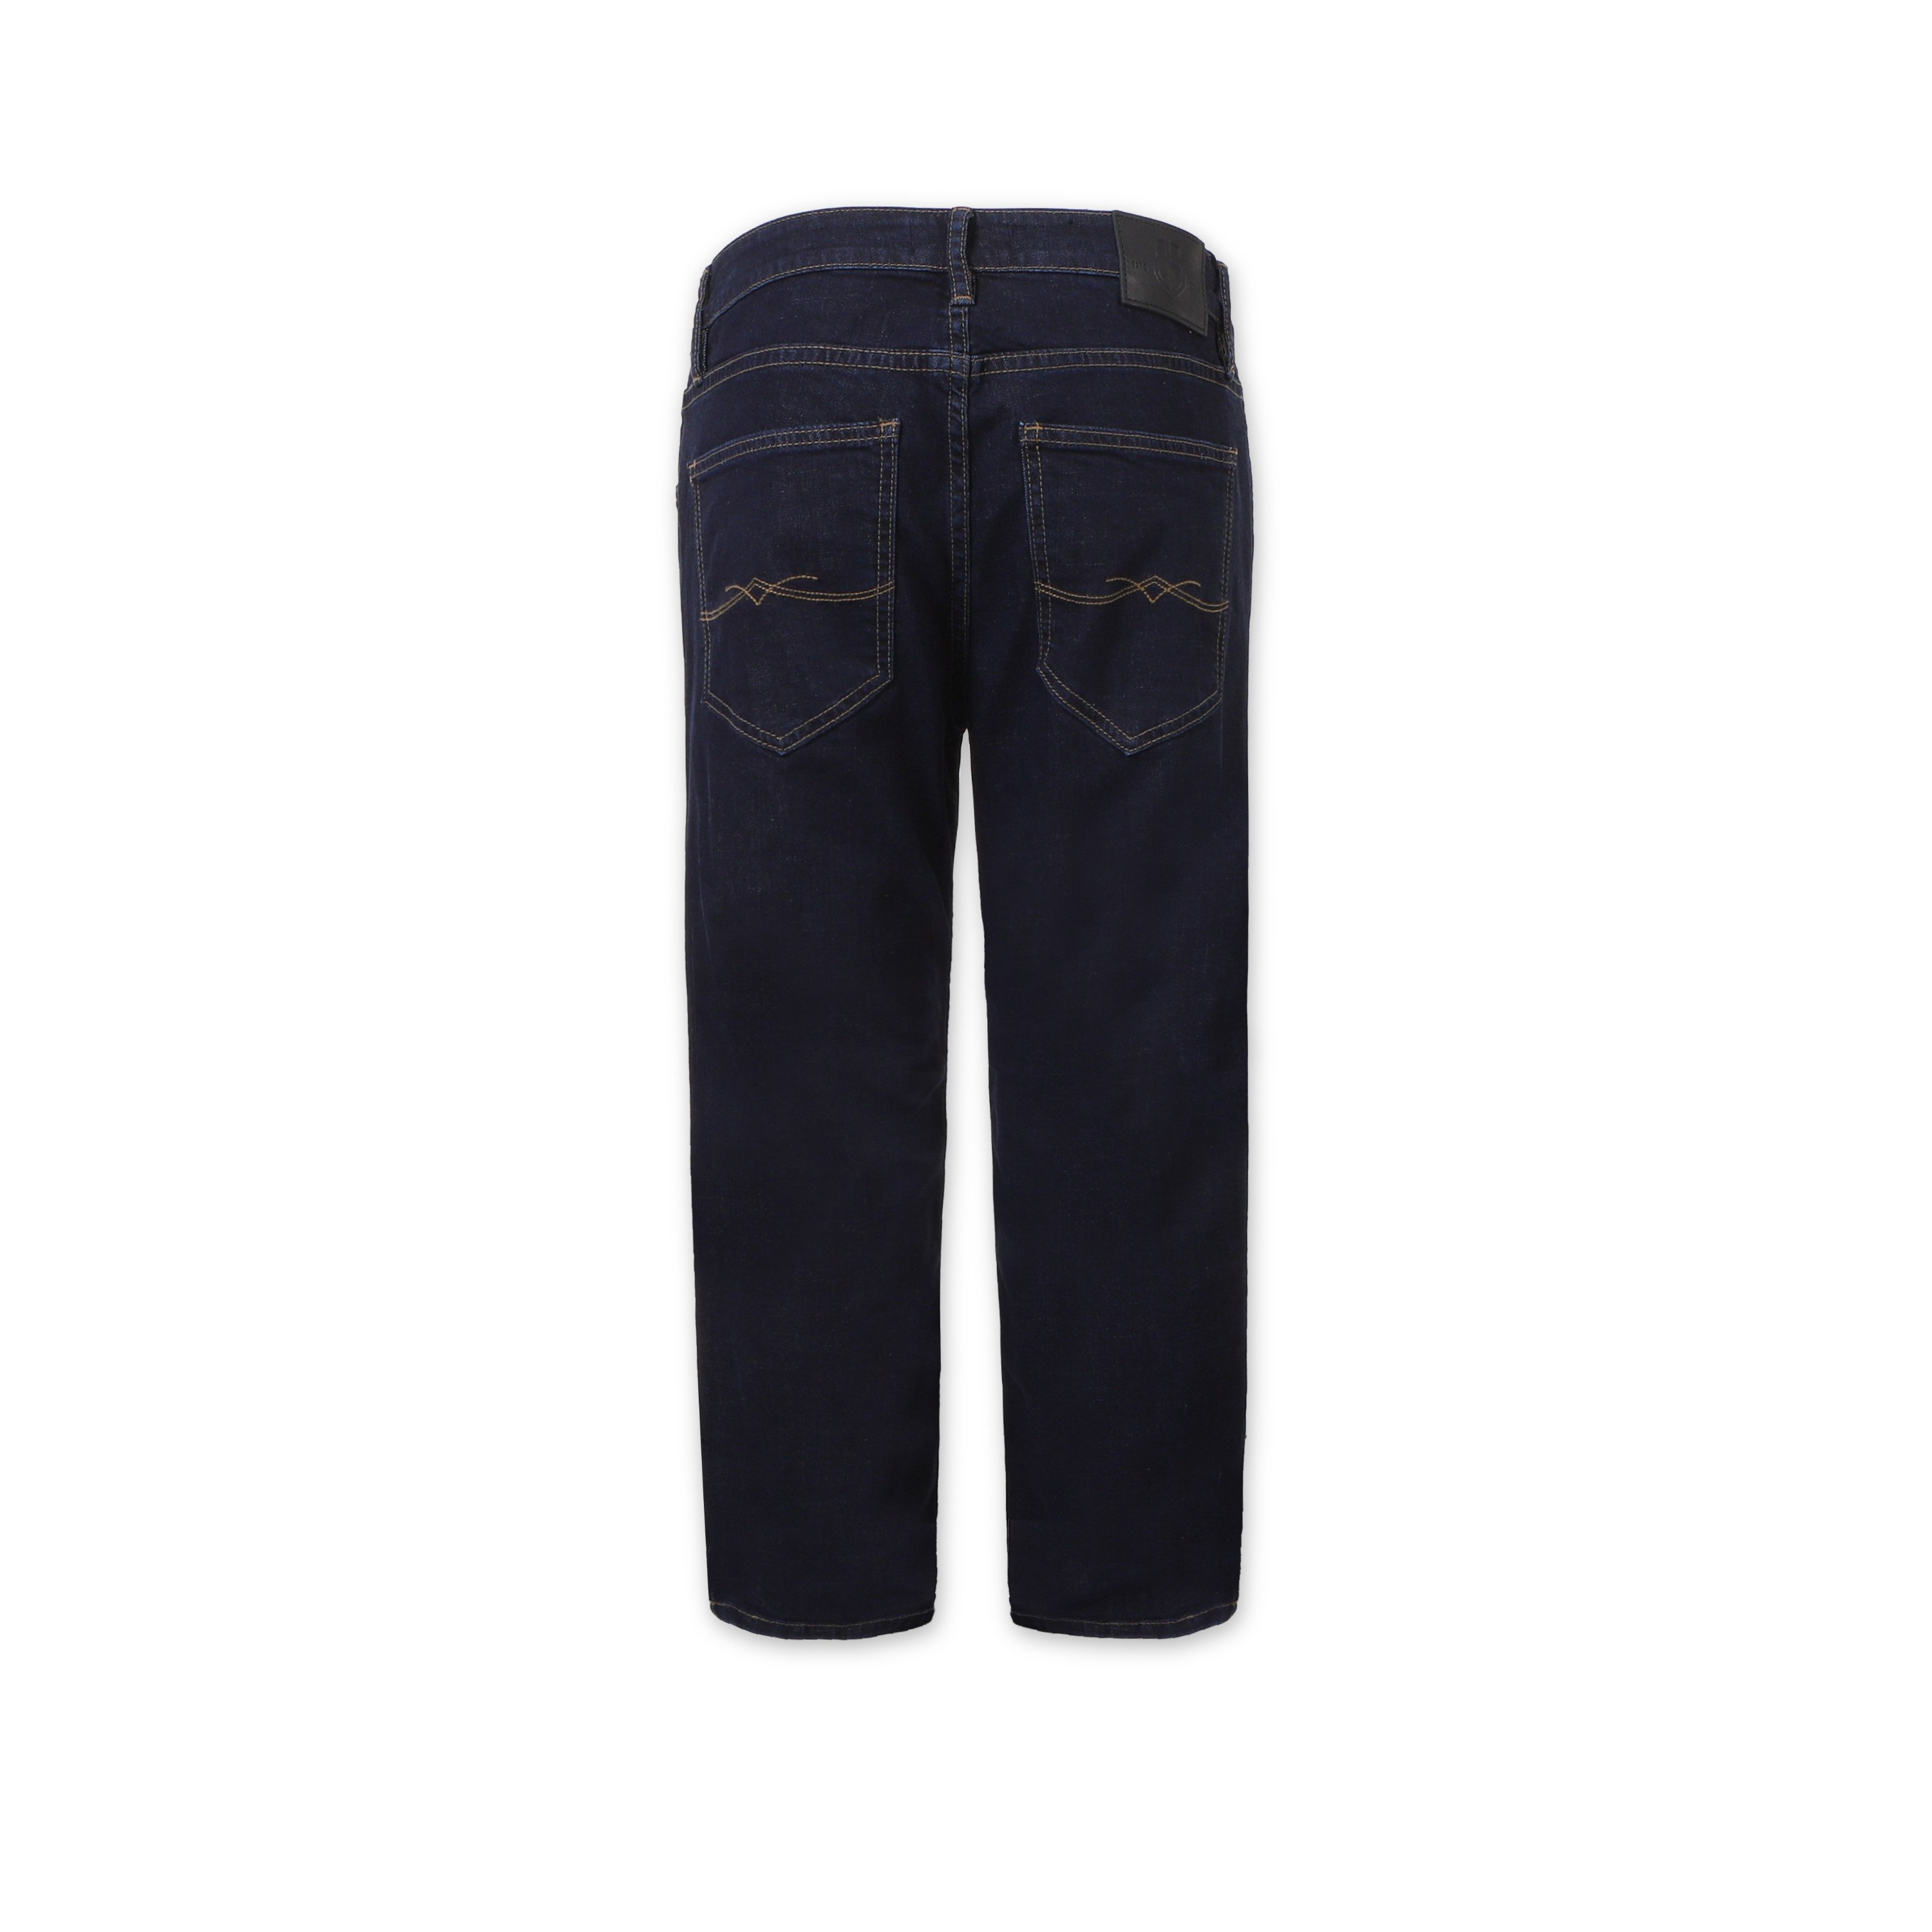 Quần jean nam ống suông Old Sailor - OSL STRAIGHT JEANS - 6552 - Big size upto 42